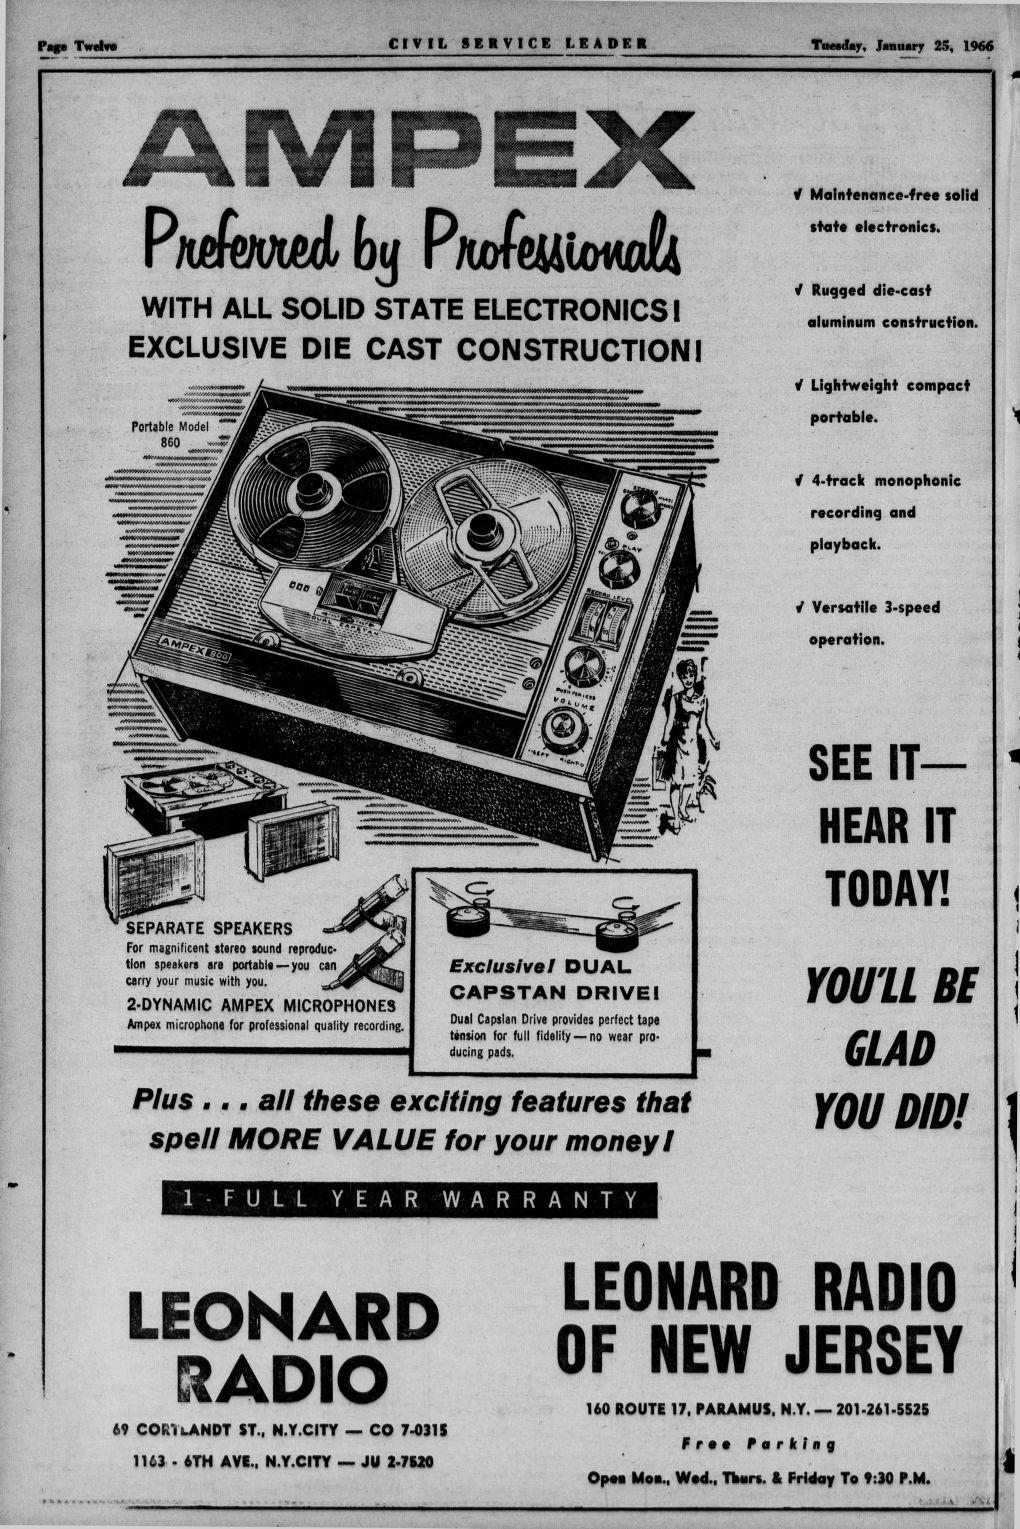 Tuesday, January 25, 1966 CIVIL SERVICE LEADER Fag«ThirtMik i Malnfenanee-free solid Pniimd b^ PWcwiowA WITH ALL SOLID STATE ELECTRONICS I EXCLUSIVE DIE CAST CONSTRUCTION!